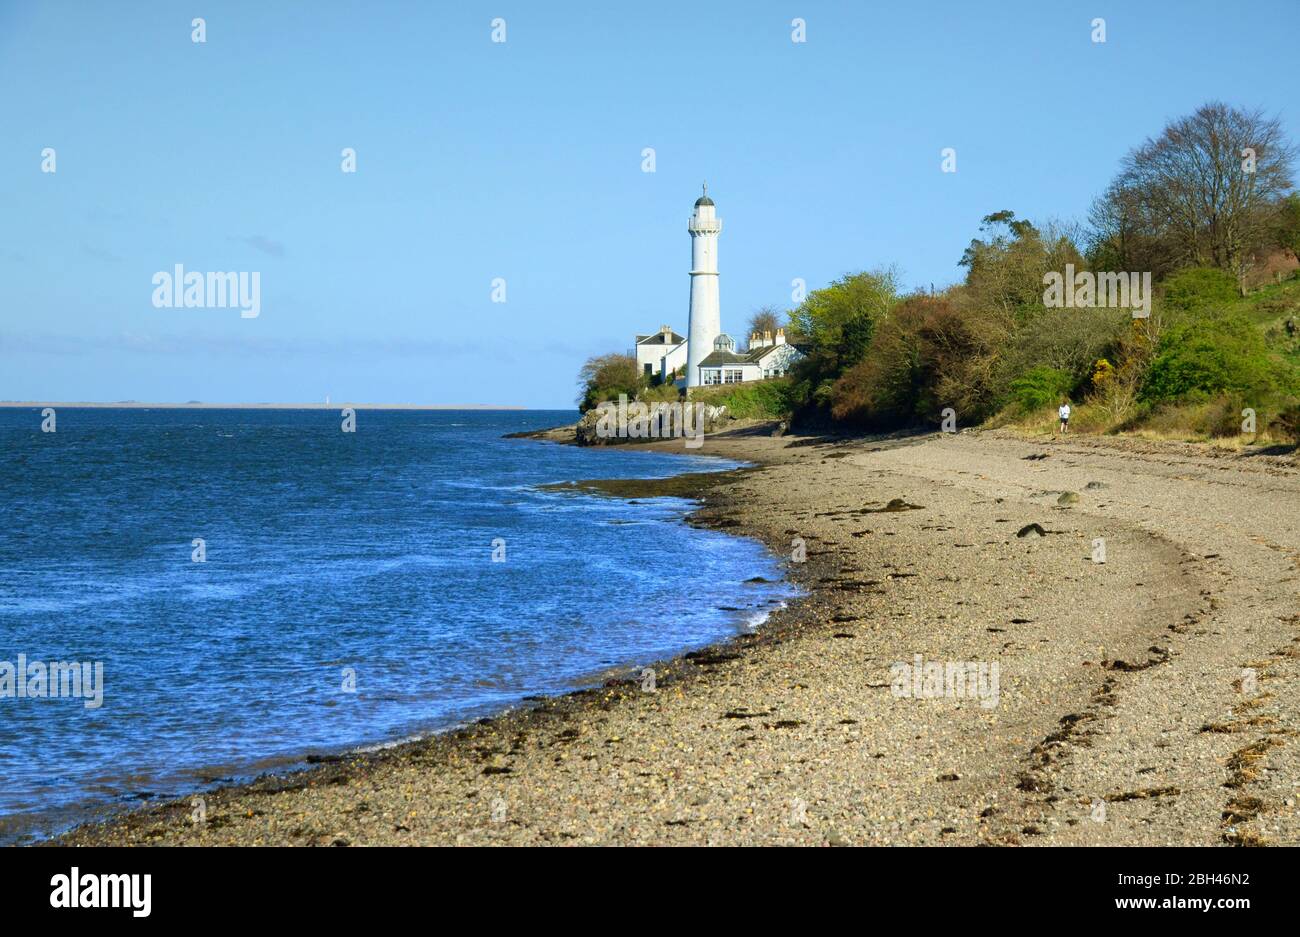 Tayport West Lighthouse, also know as Tayport High Light  situated on the Tay estuary near Dundee. Stock Photo